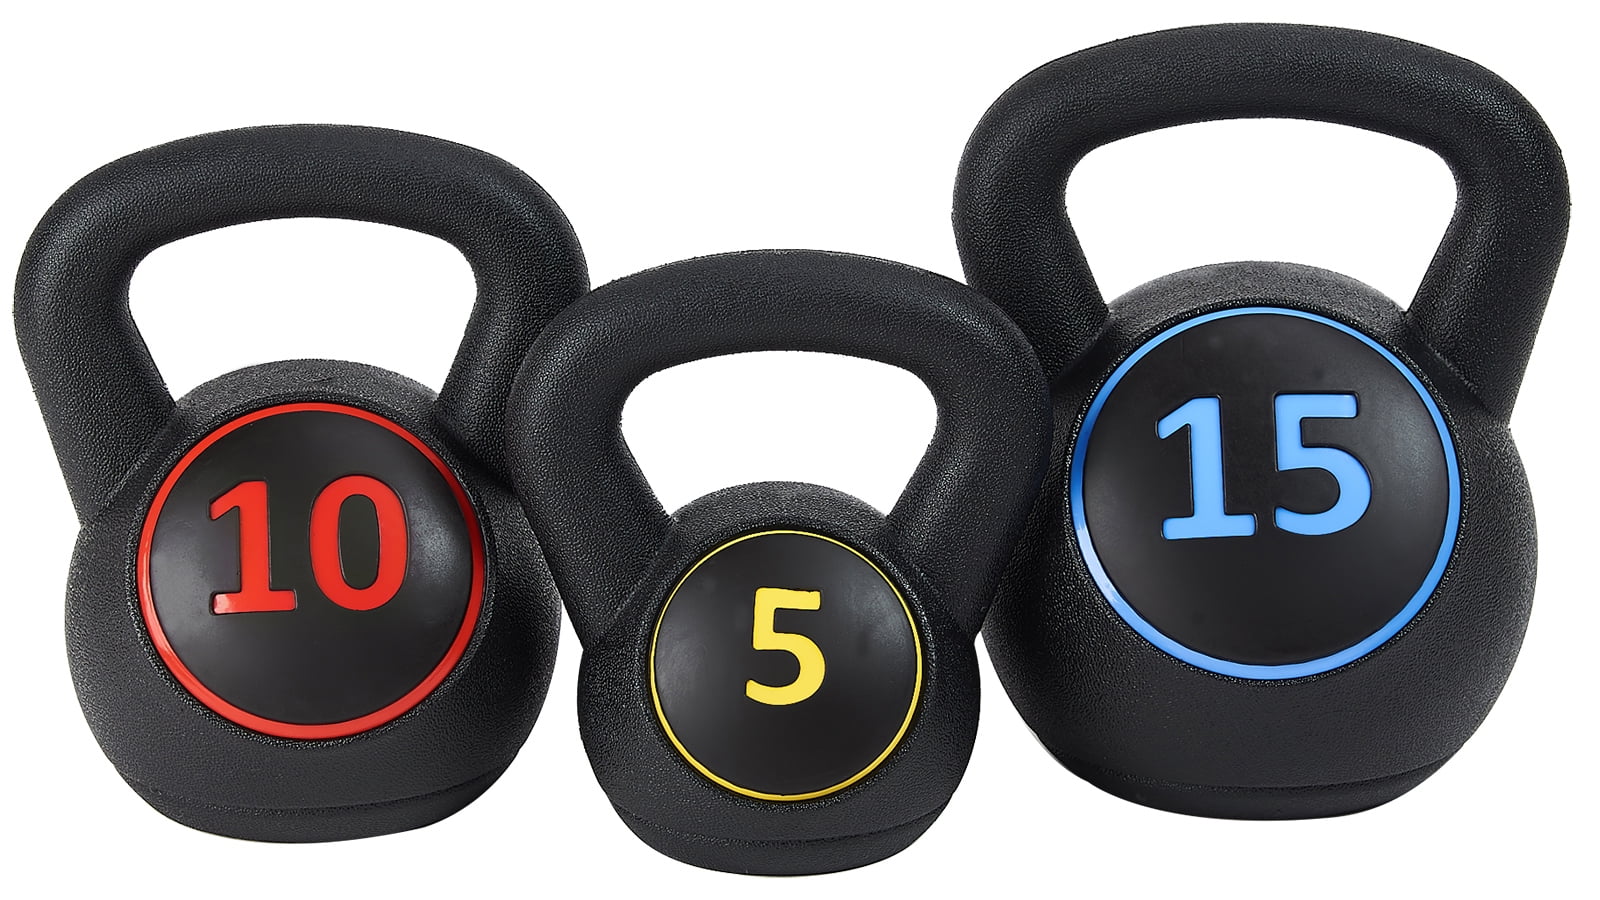 3 Piece for sale online Best Choice Products Kettlebell Exercise Fitness Weights Set with Base Rack 